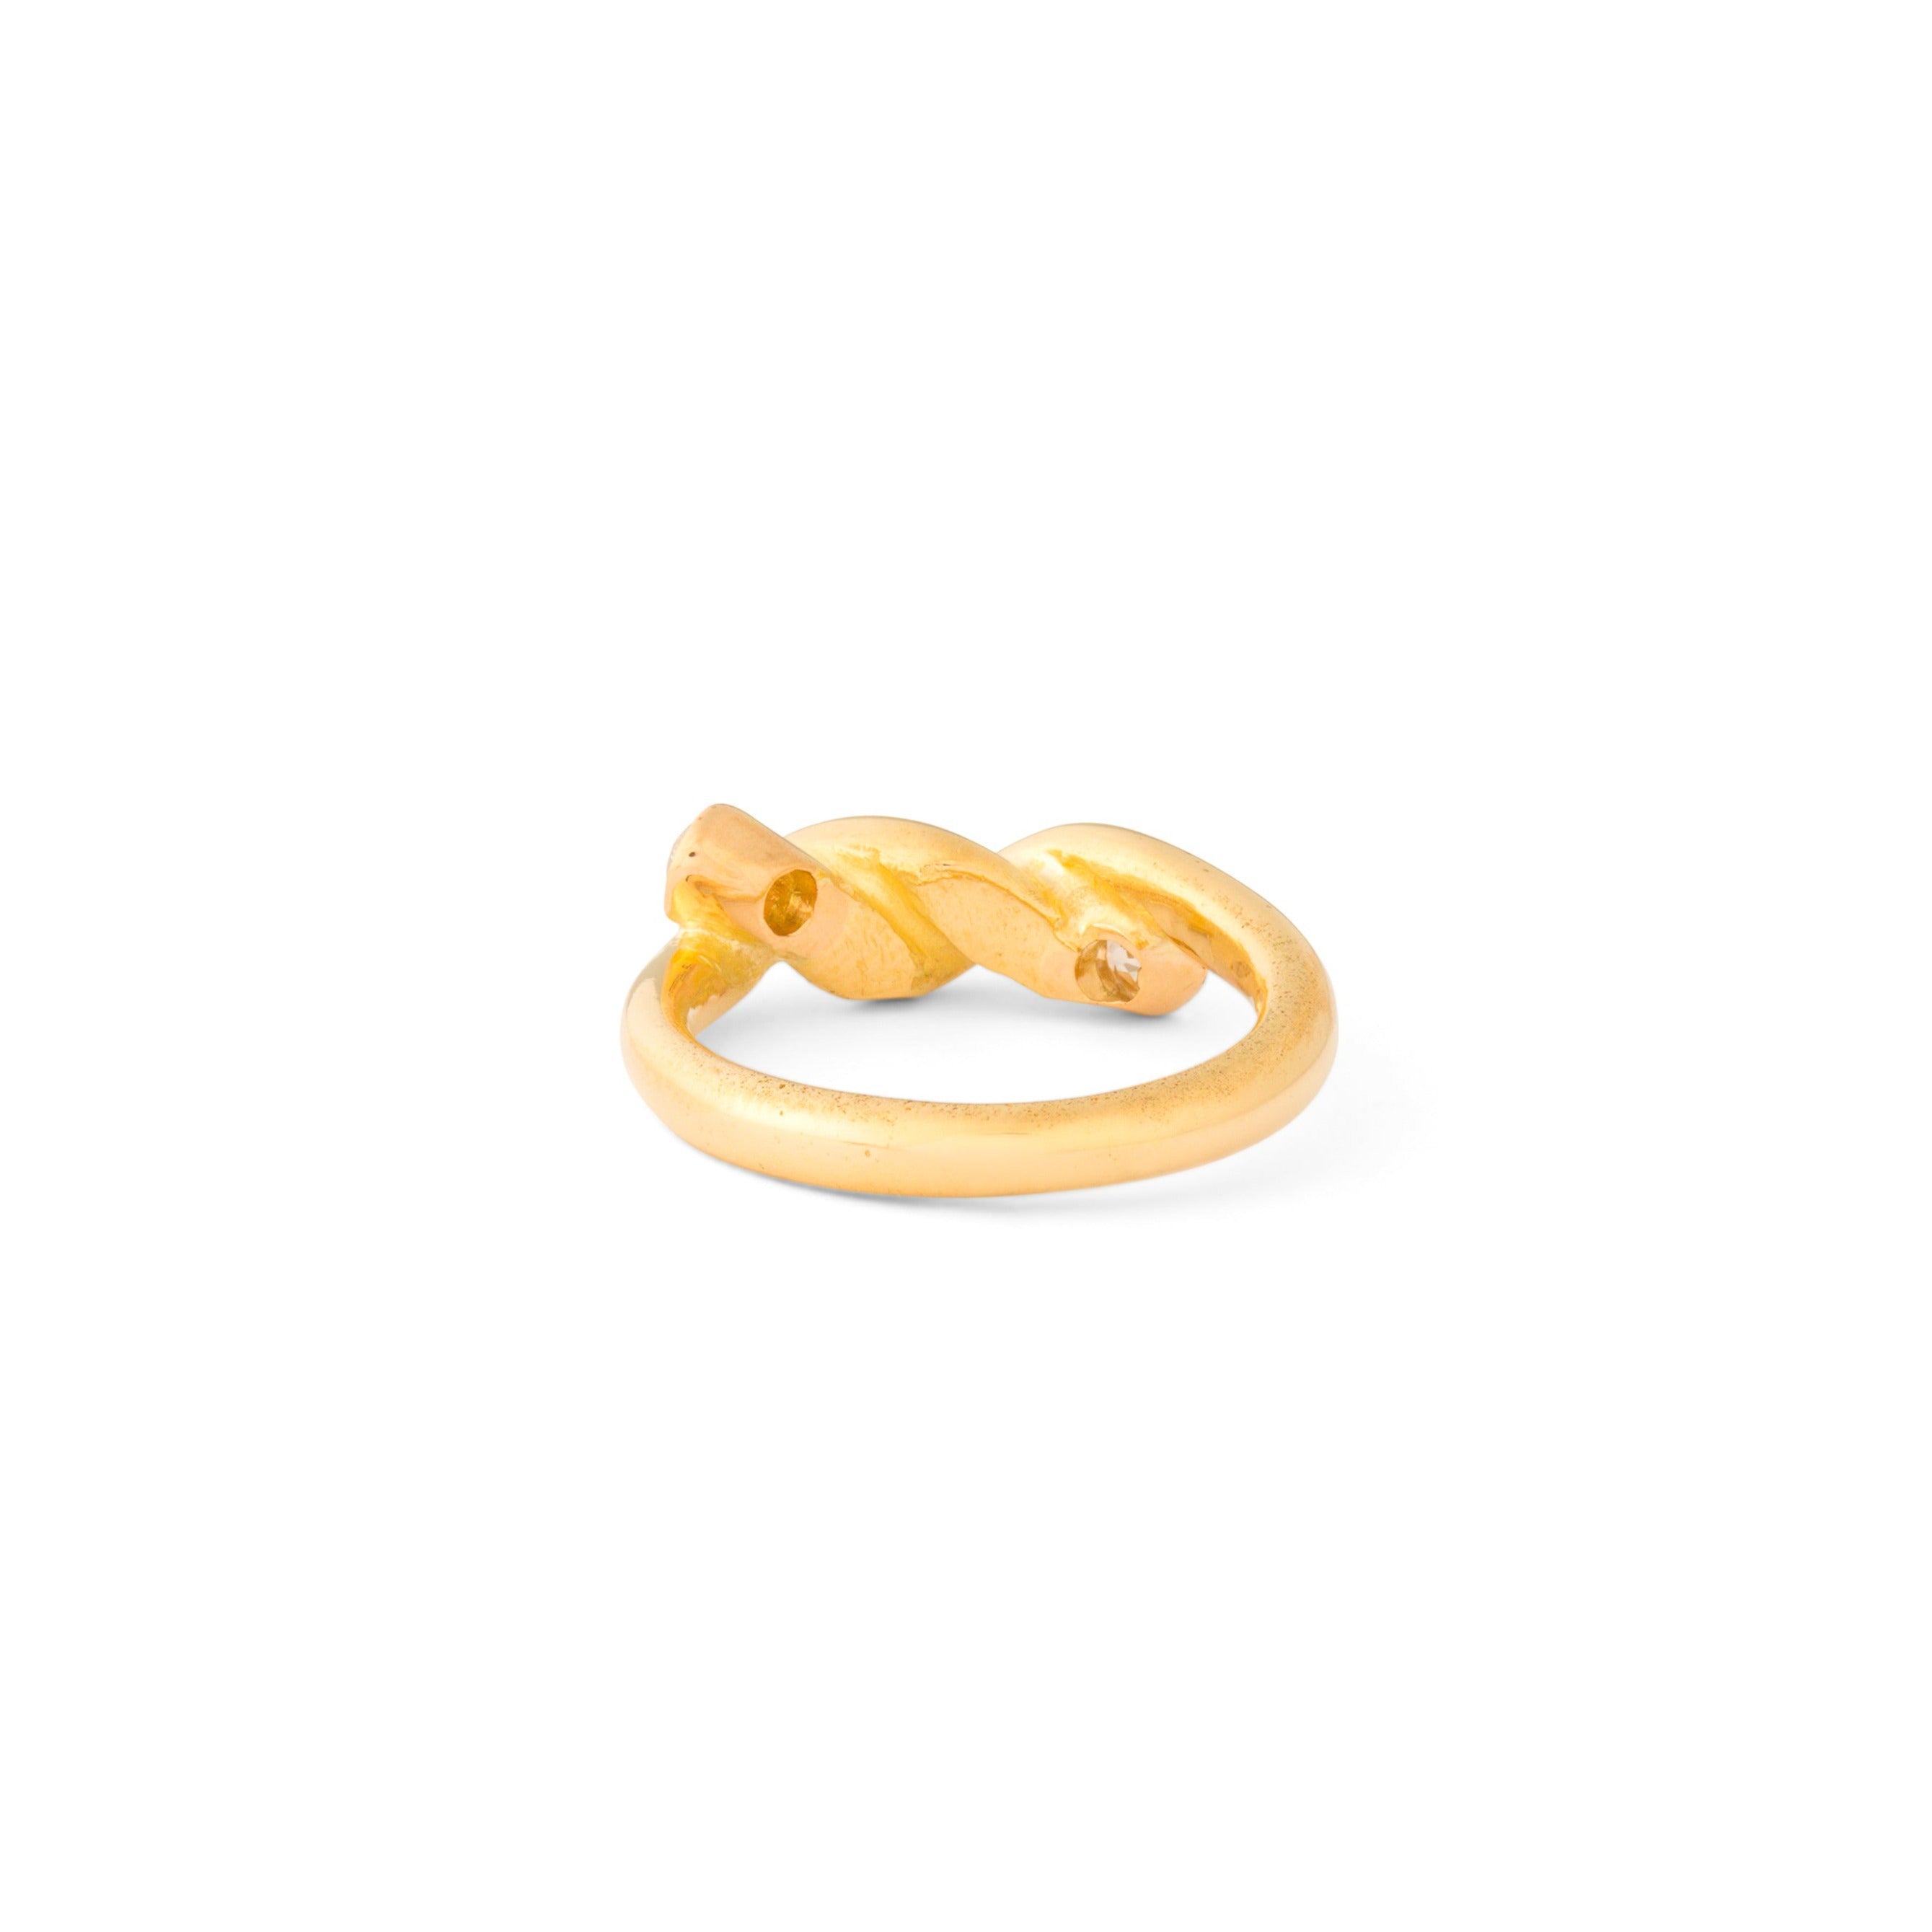 Diamond and 14k Gold Knot Ring